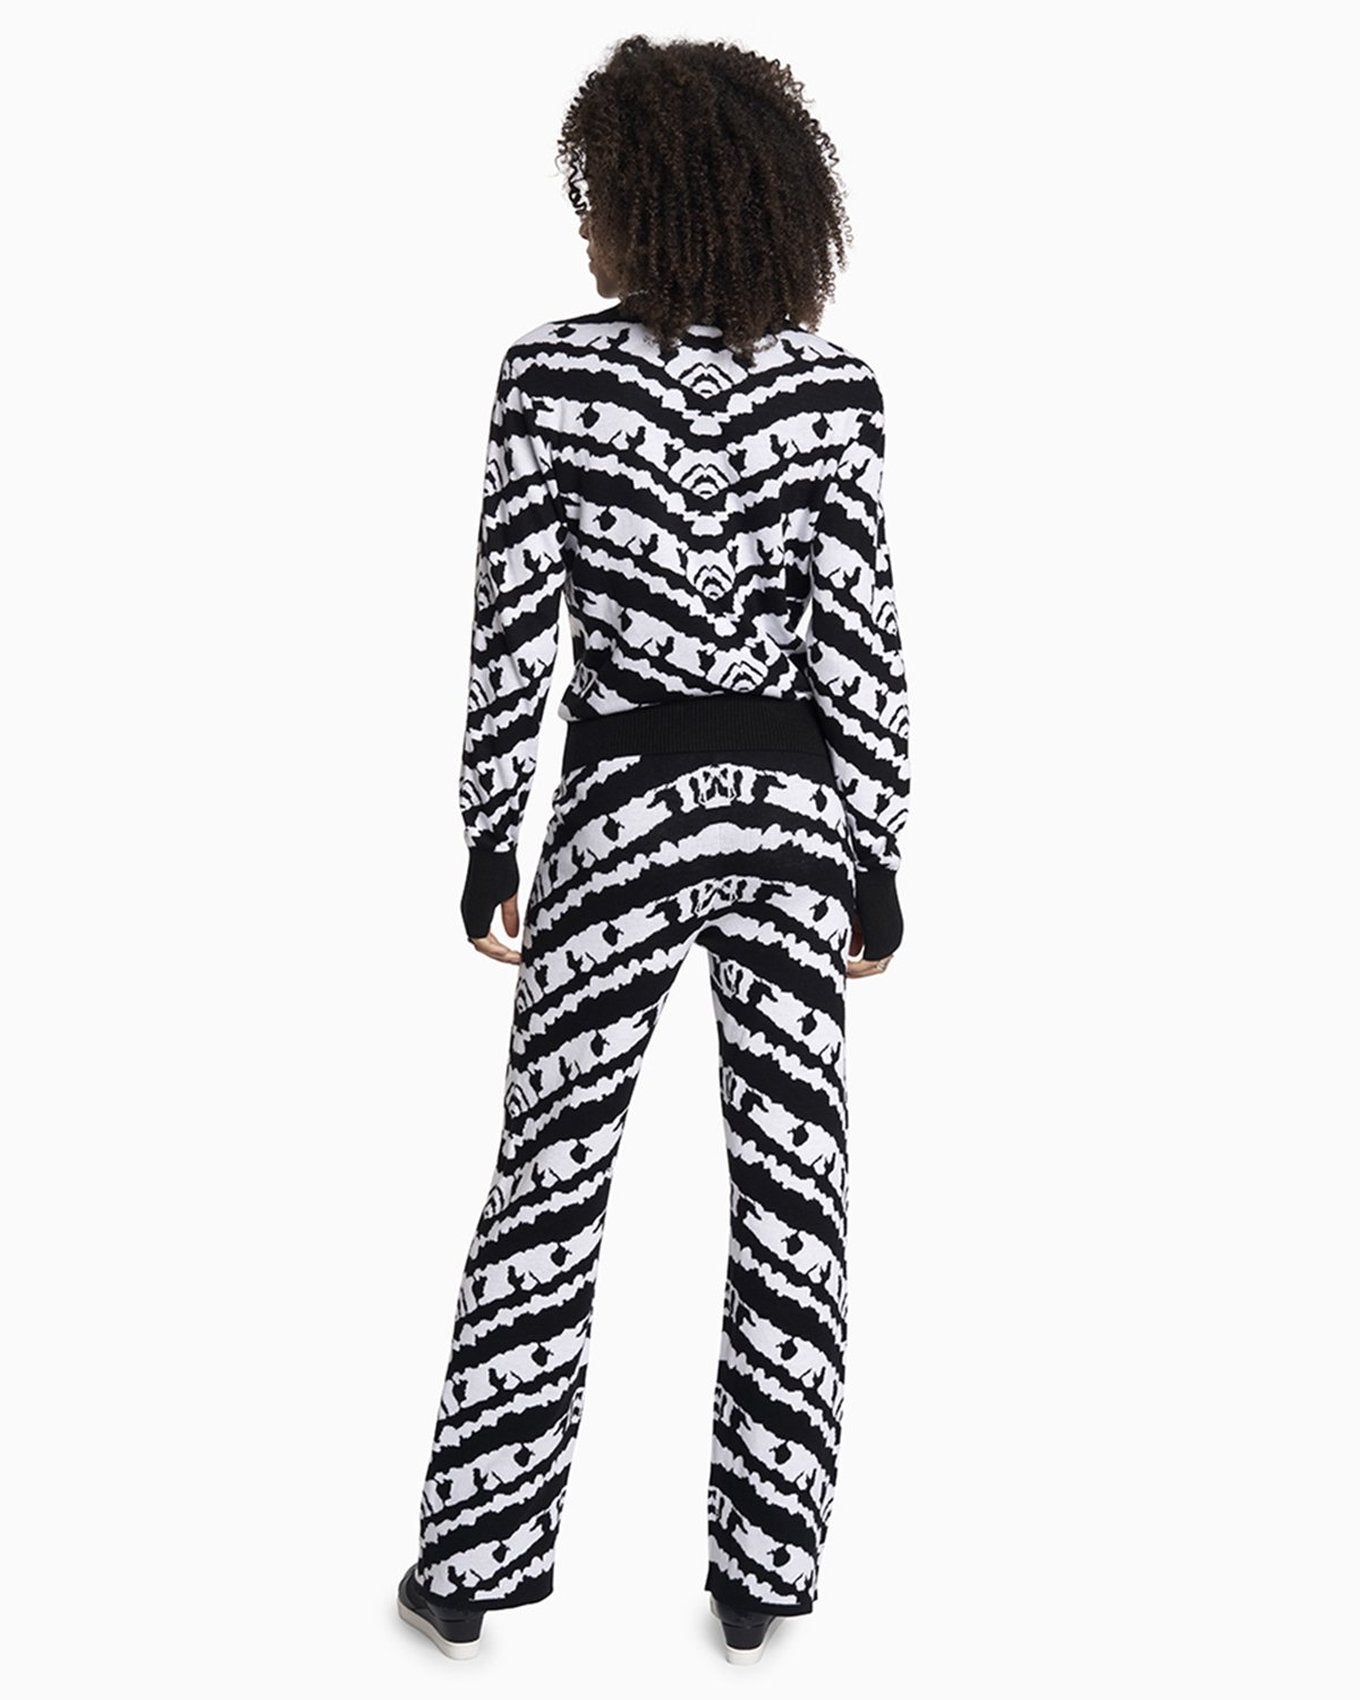 YesAnd Organic Knit Pant Knit Pant in color B&W Jacquard C01 and shape pants